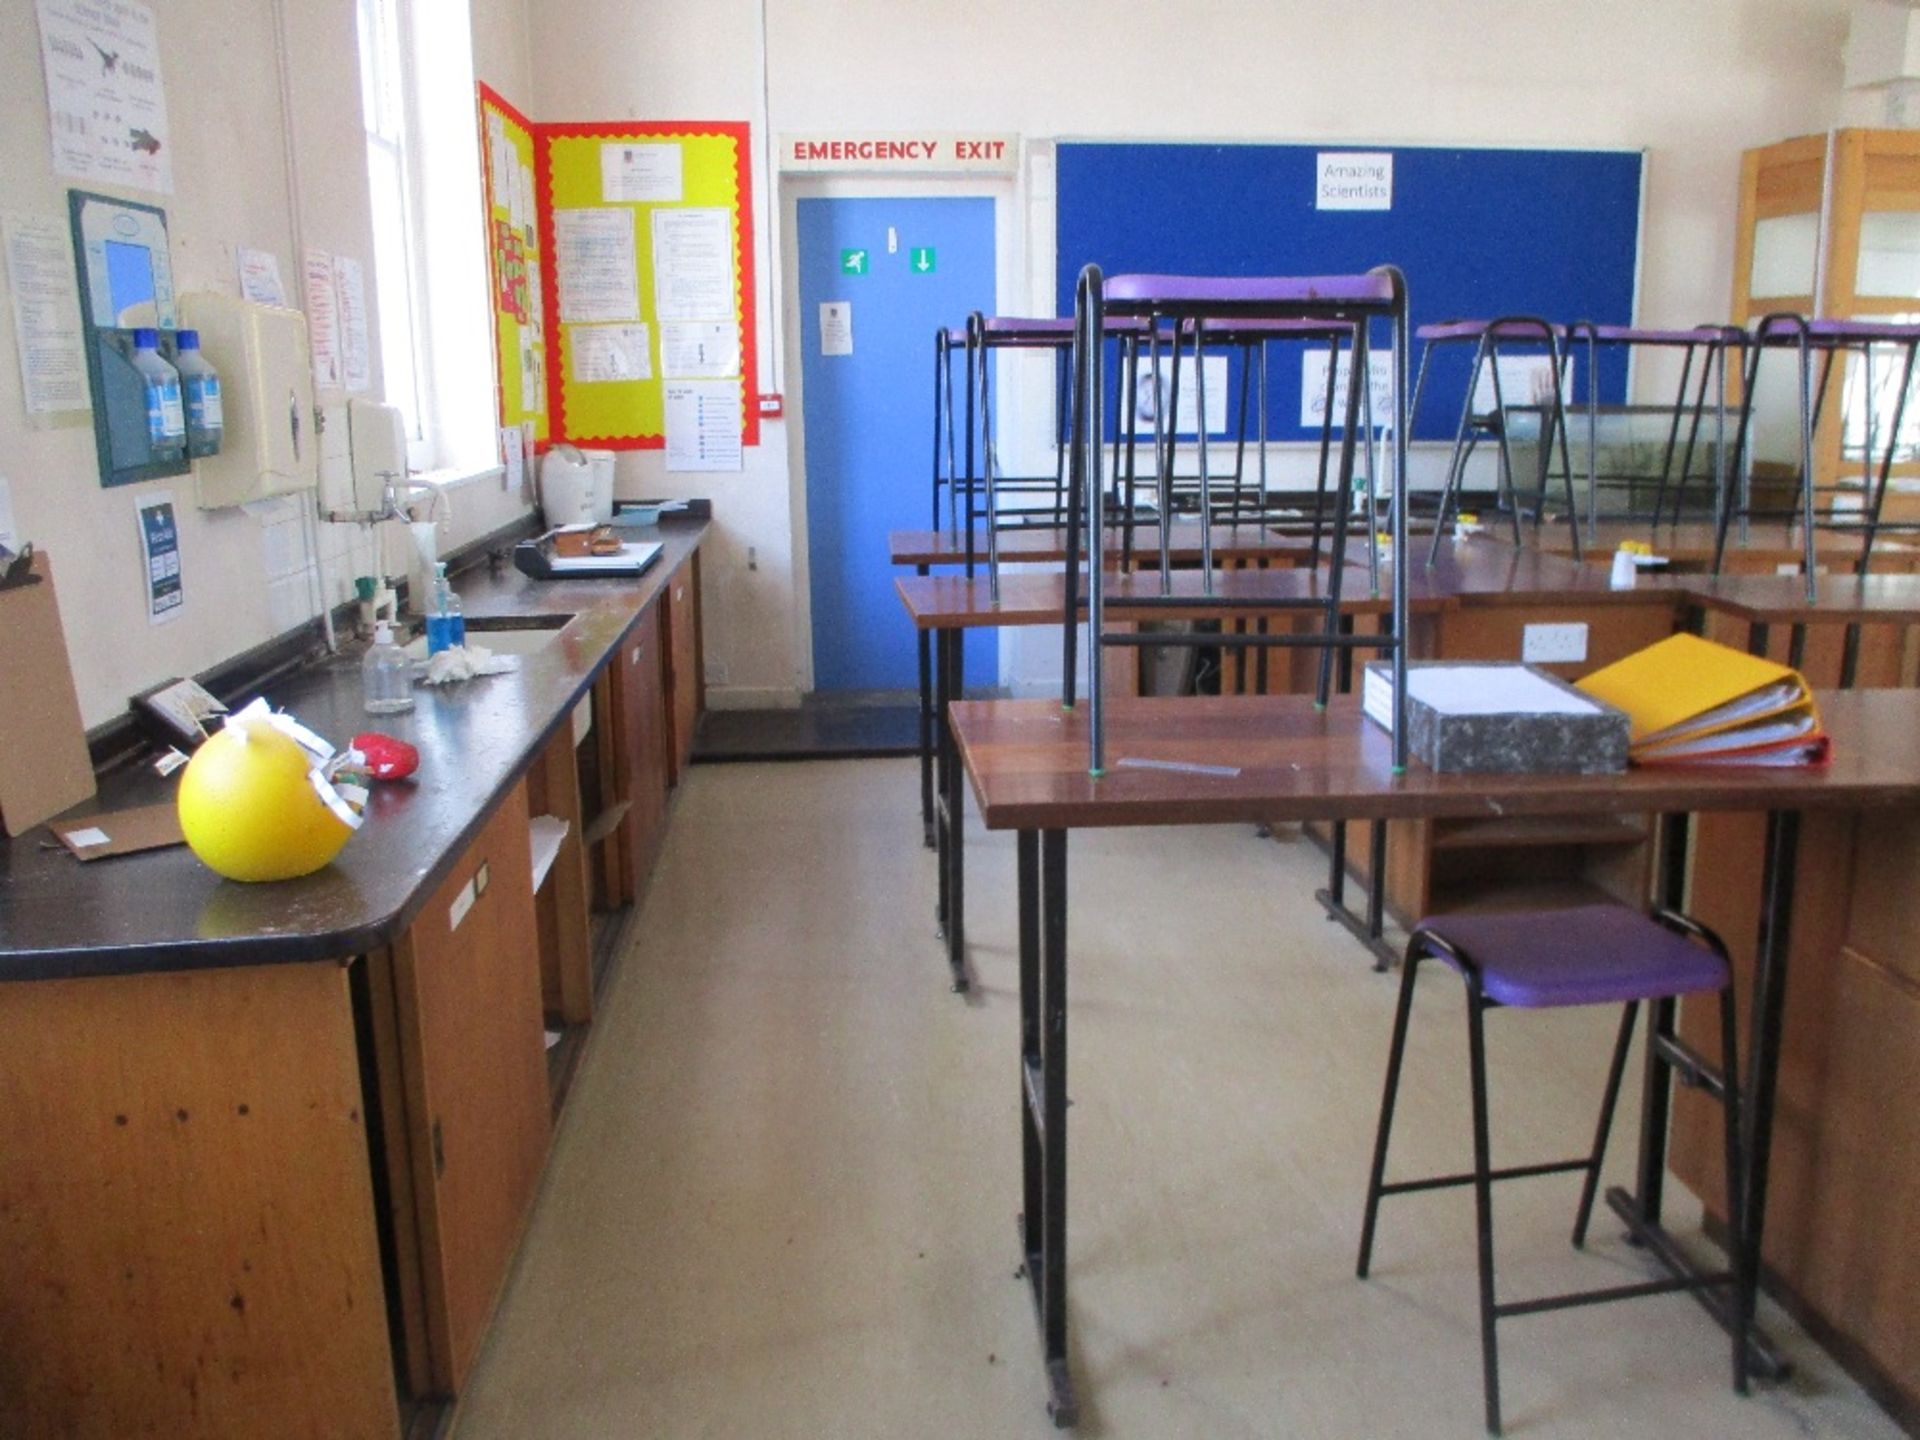 Contents of L8 Science Lab - Image 2 of 5